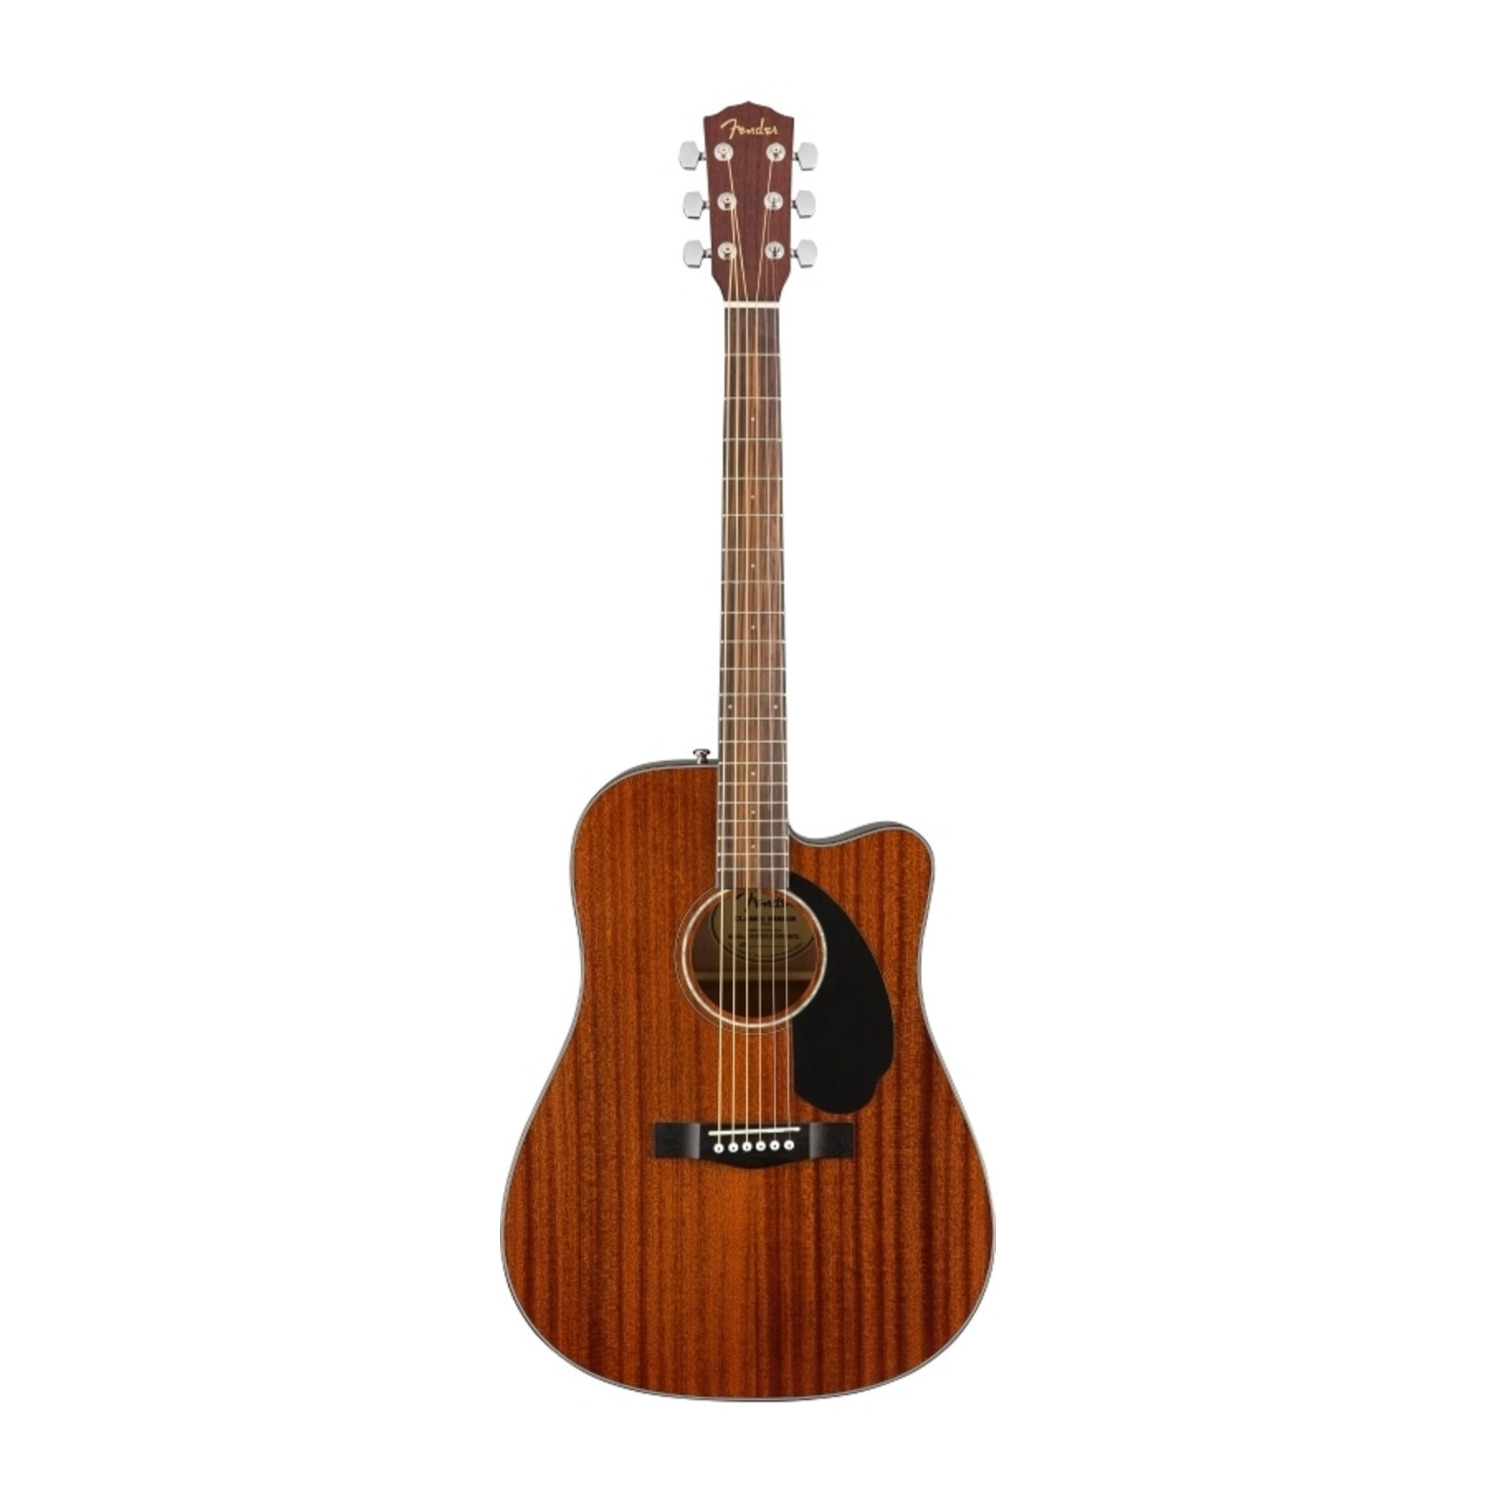 Fender CD-60SCE Dreadnought 6-String Acoustic Guitar (Right-Hand, All-Mahogany) -  0970113022